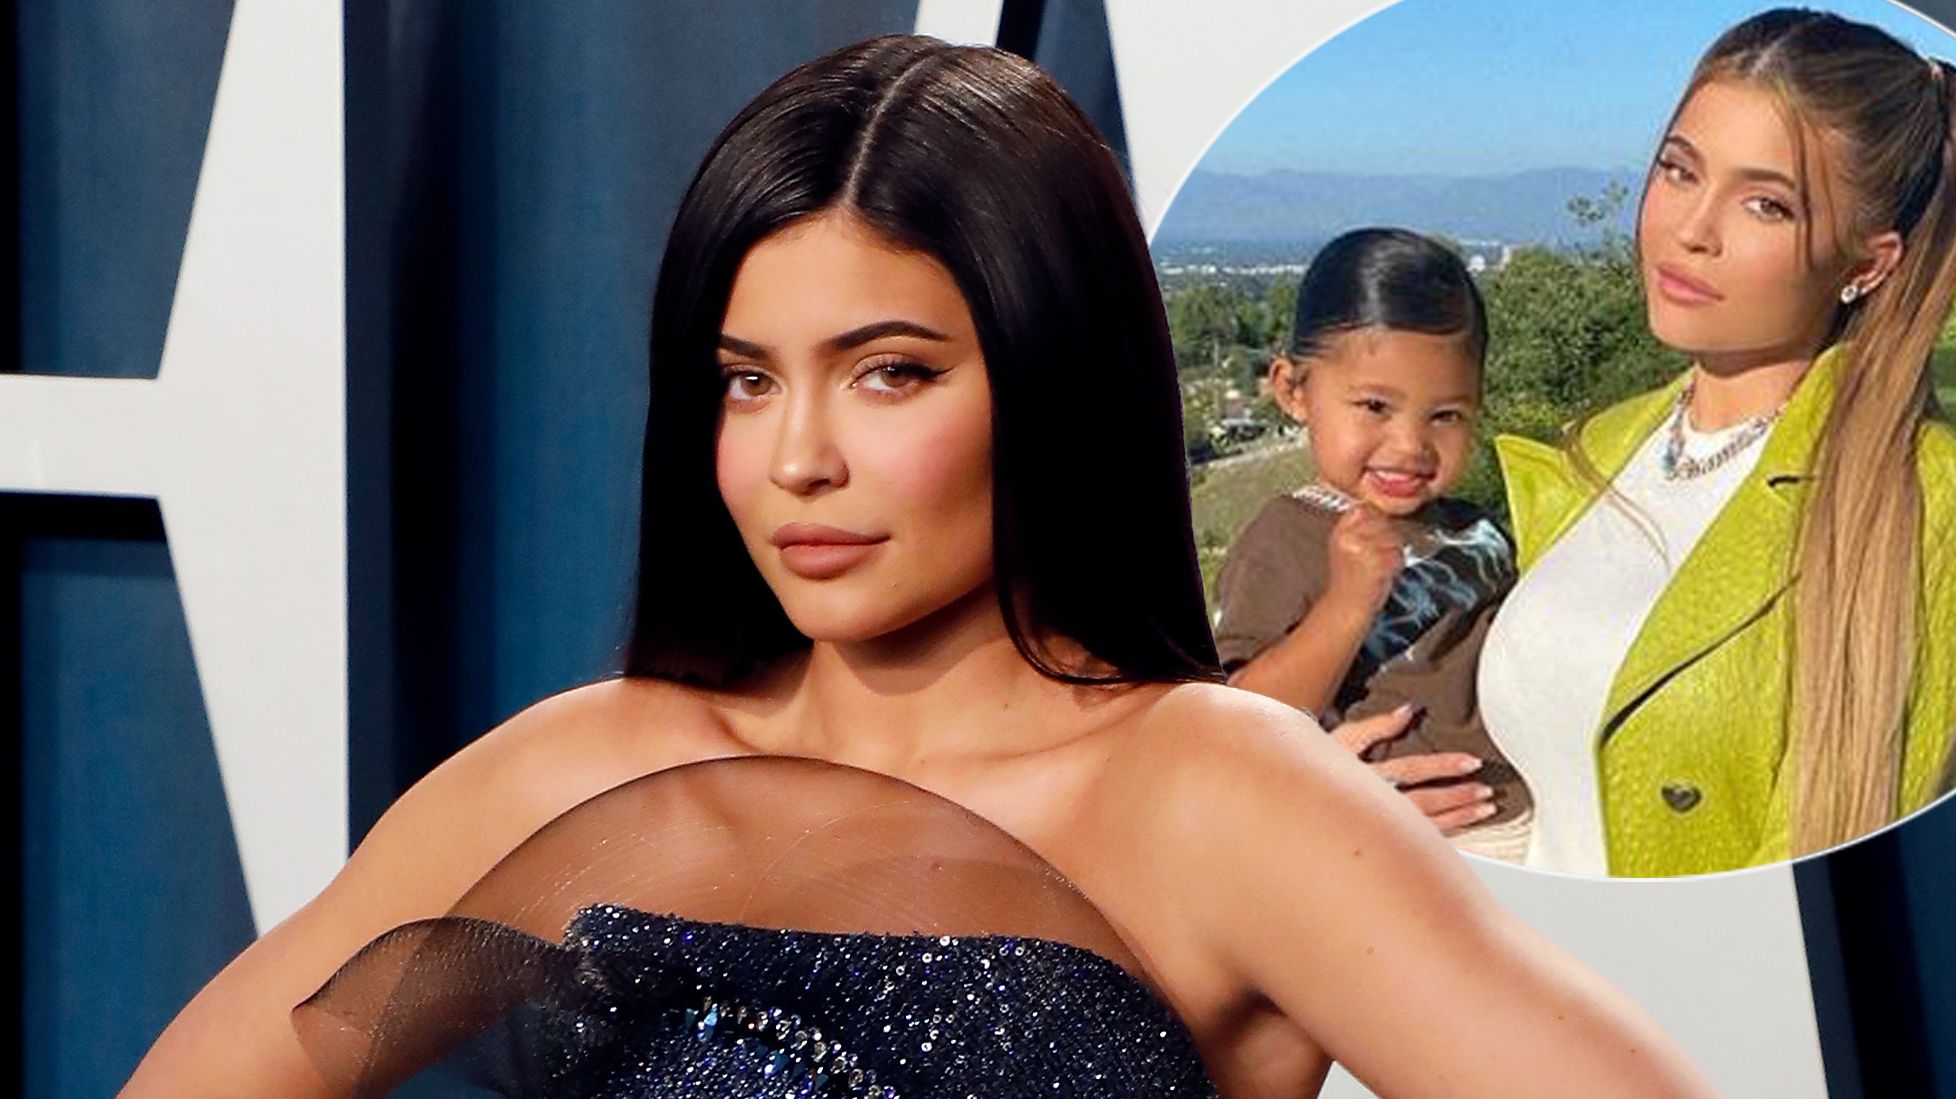 Kylie Jenner has cheeky reason for throwback pic